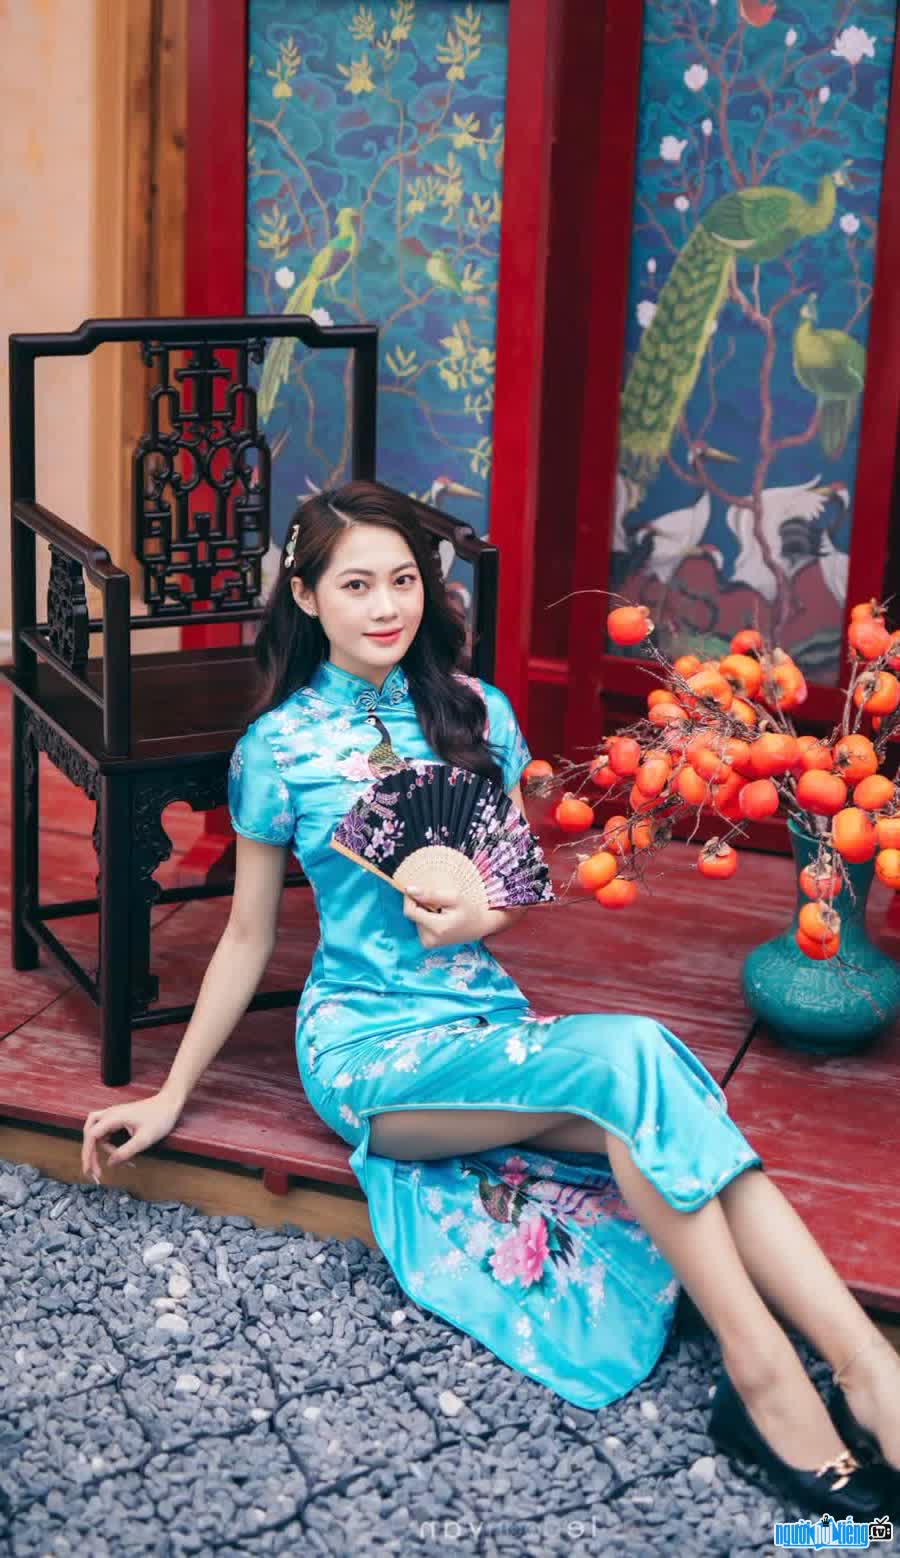 Photo model of Tran Nhat Mai transforms into a Chinese girl